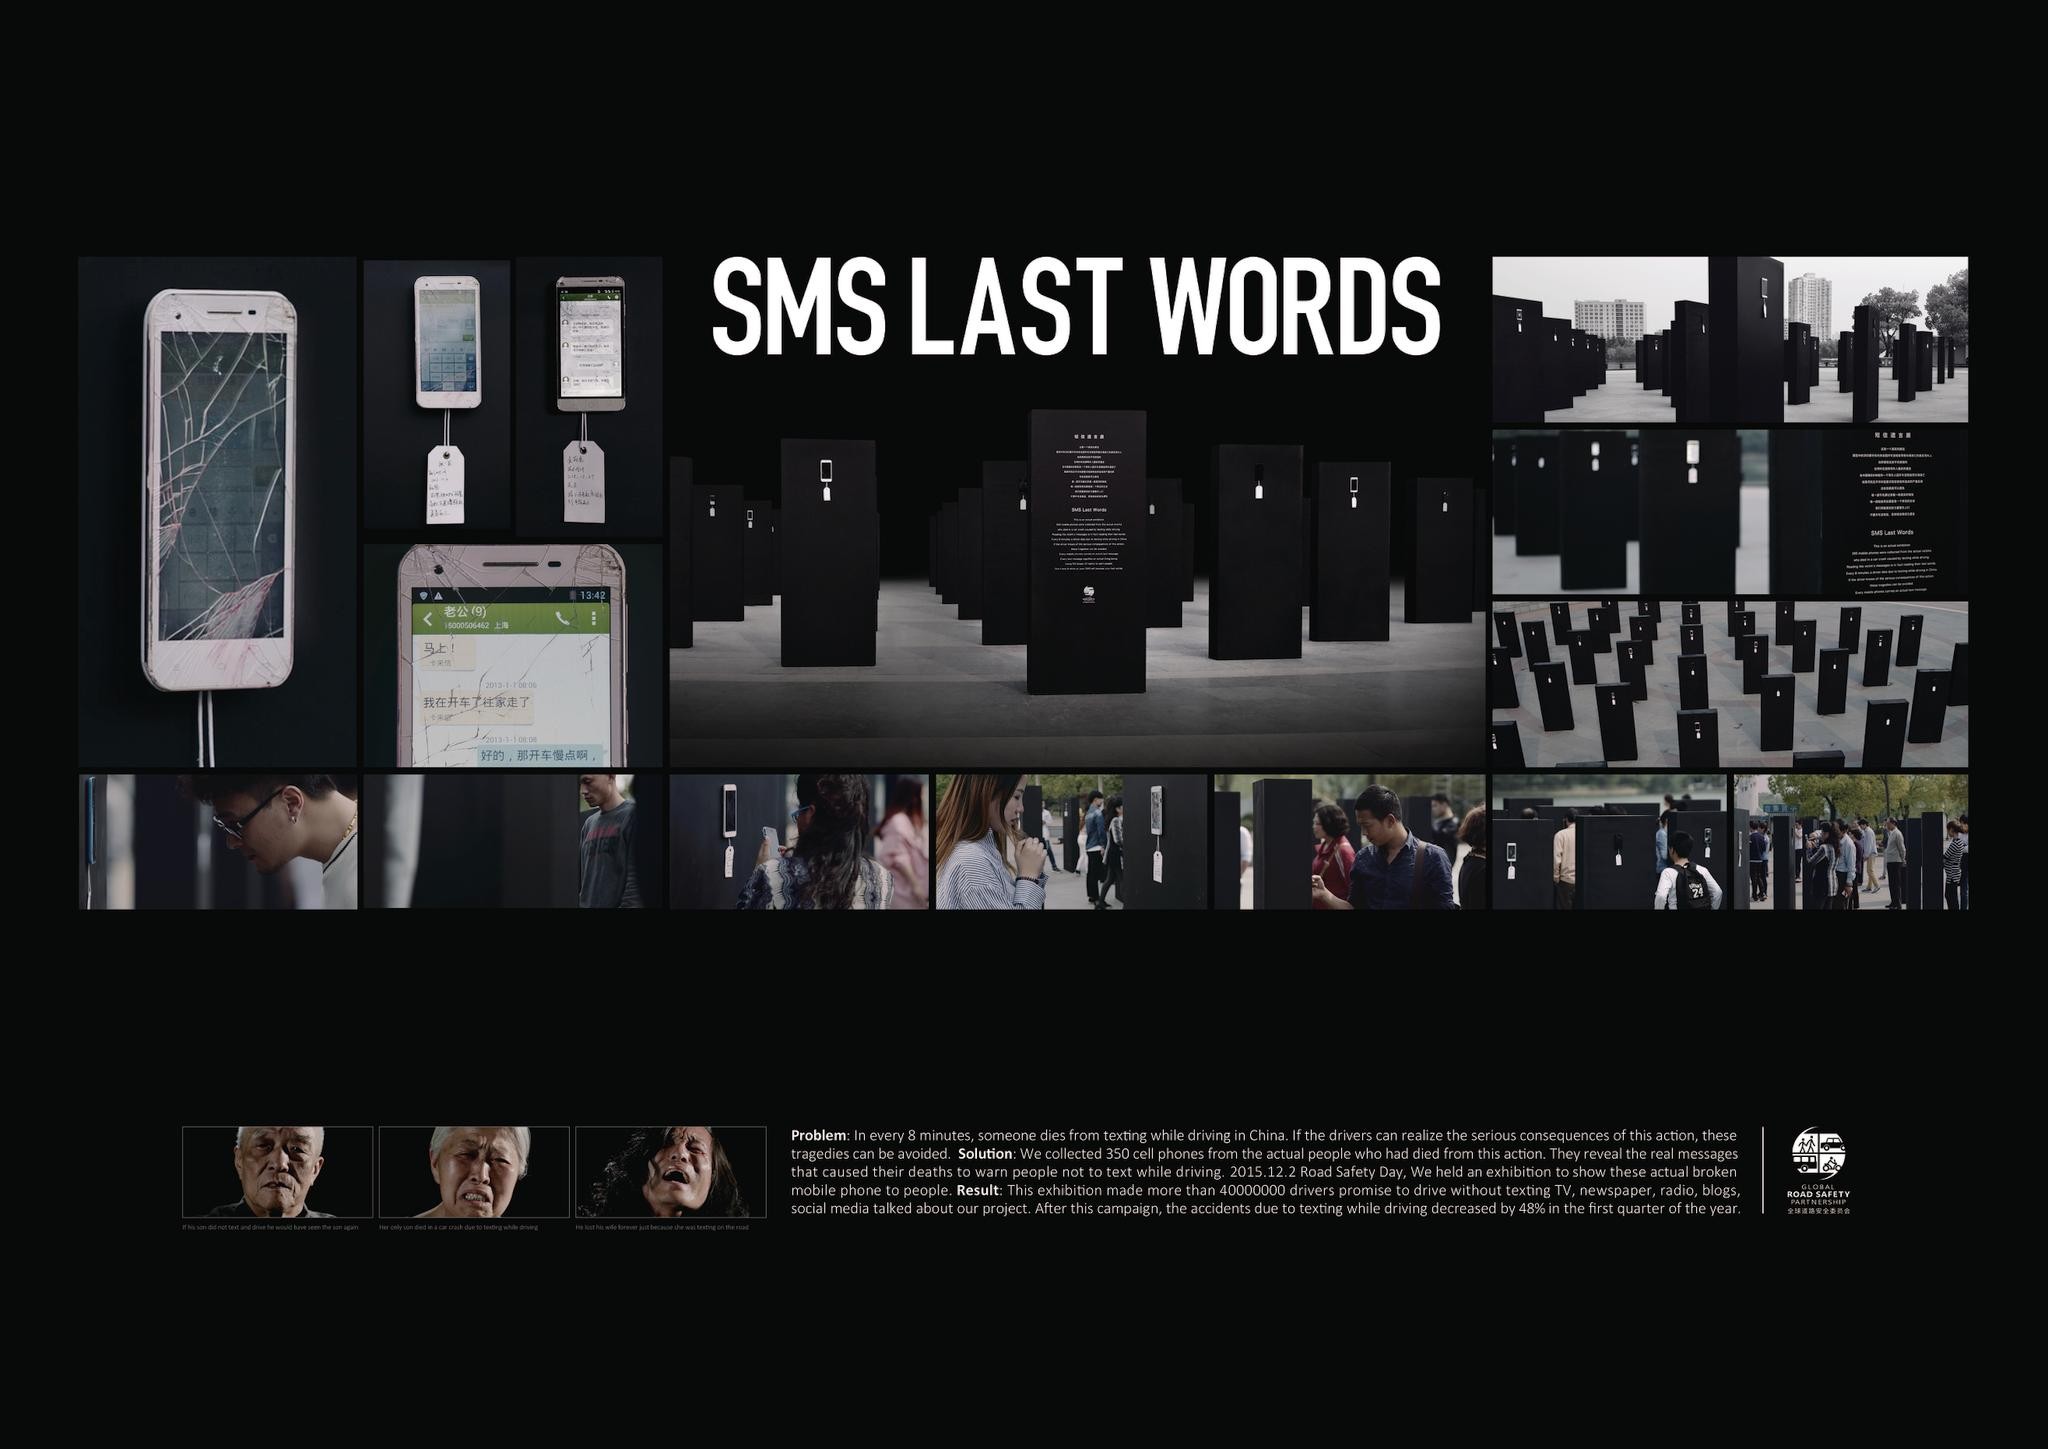 SMS LAST WORDS